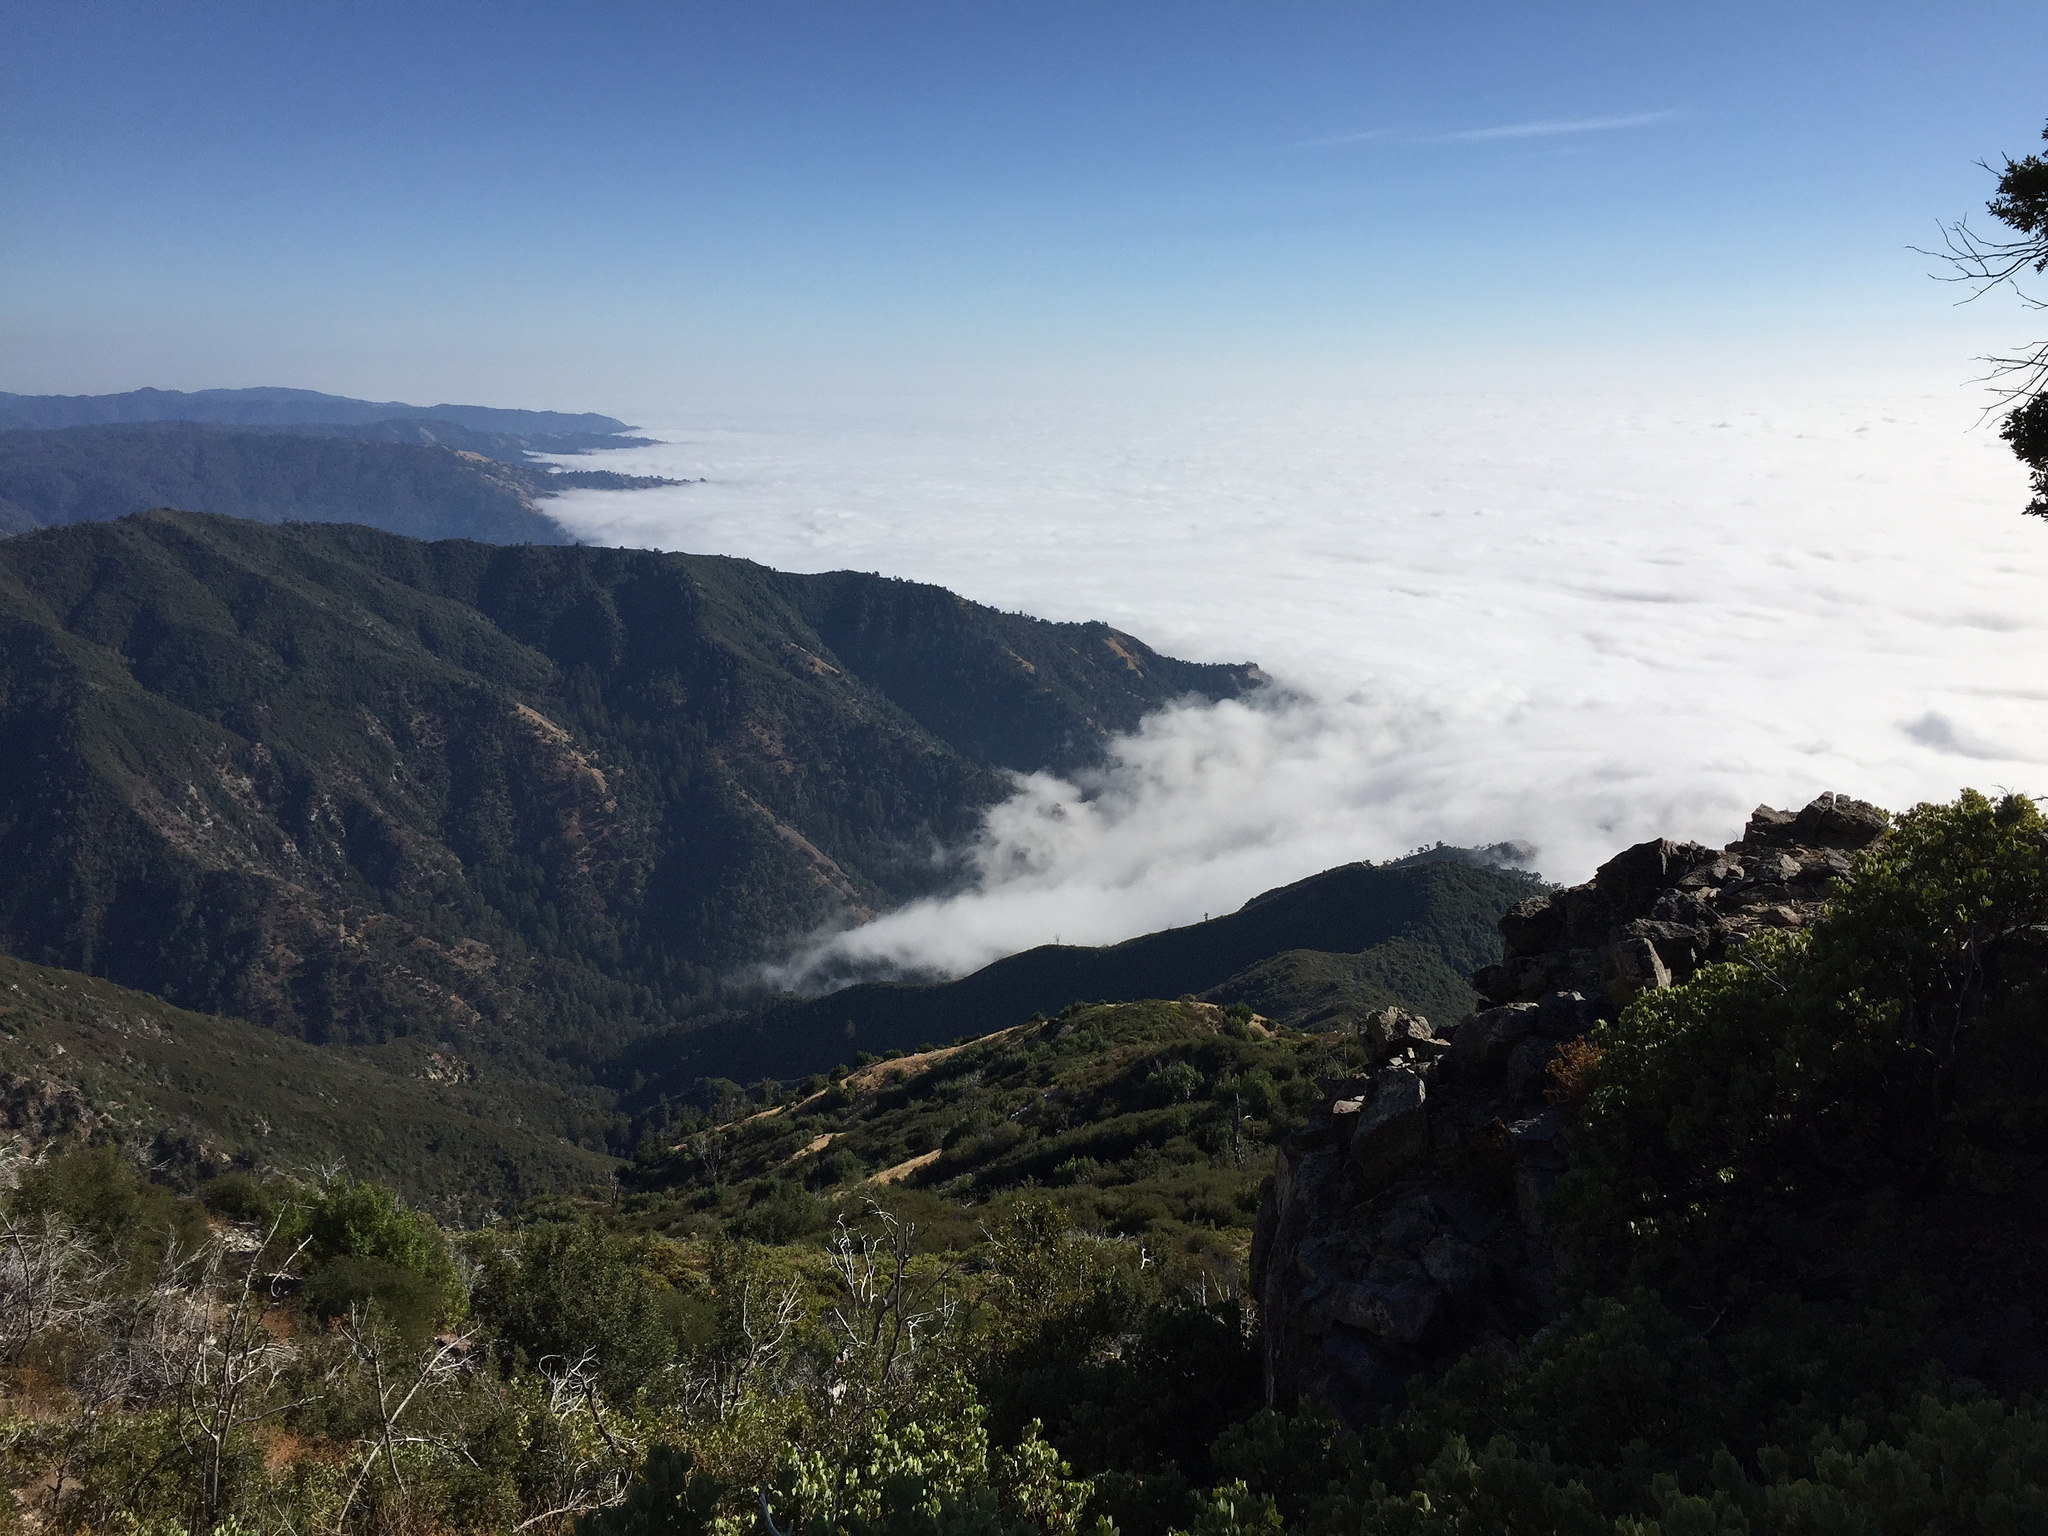 View of fog on the coastline from near Cone Peak